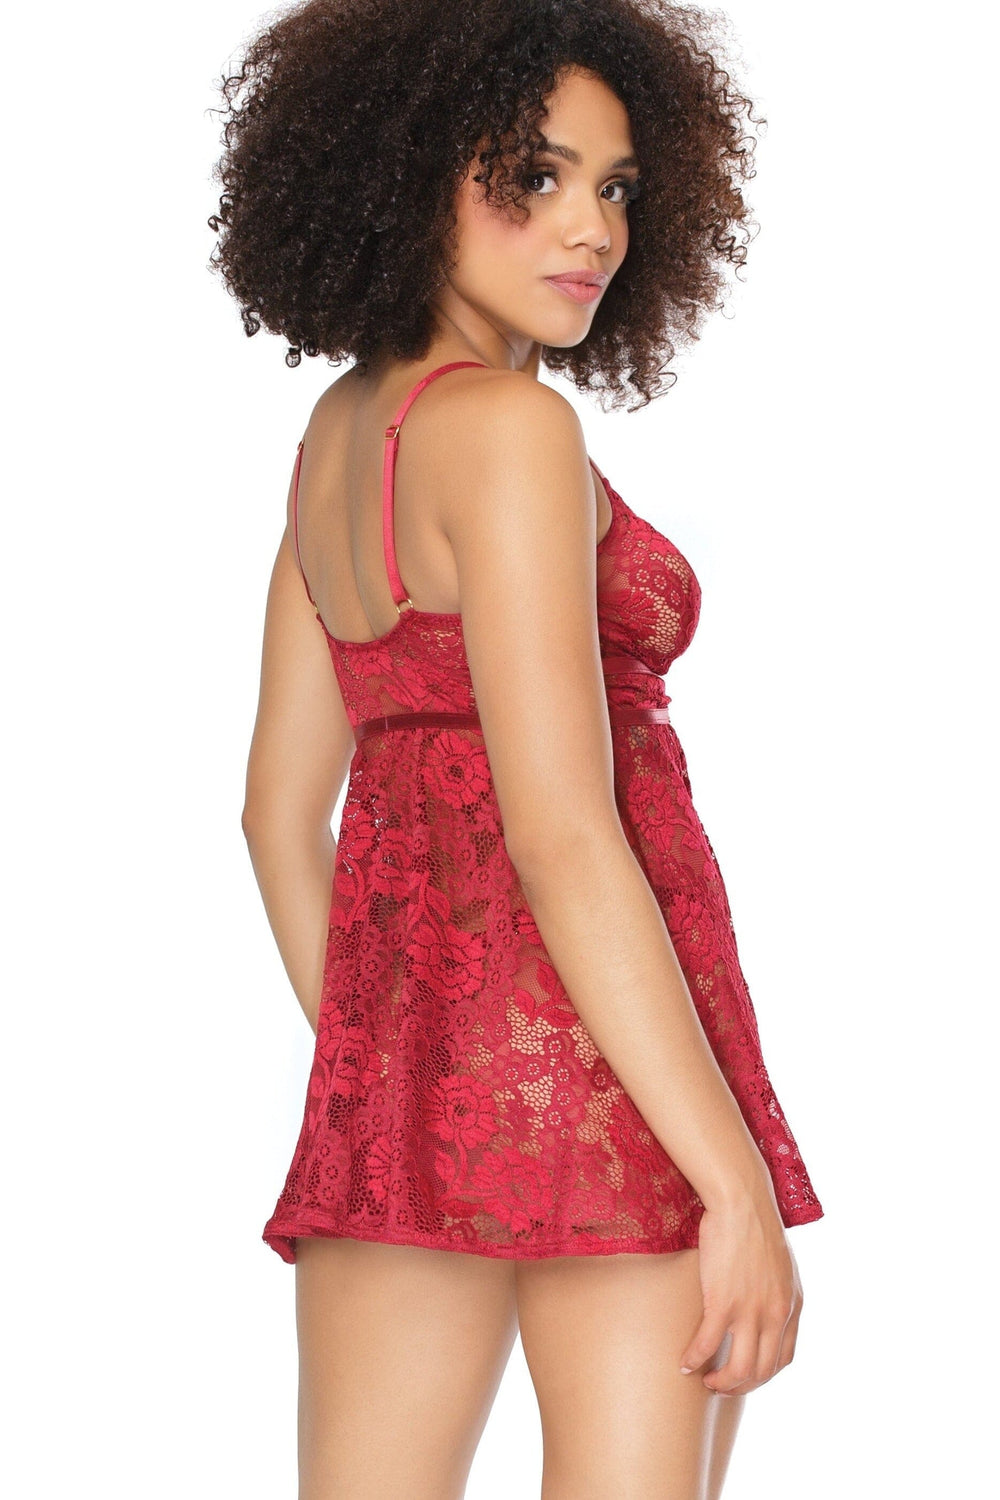 Floral Lace Babydoll Thong Set-Babydolls-Coquette-Red-O/S-SEXYSHOES.COM